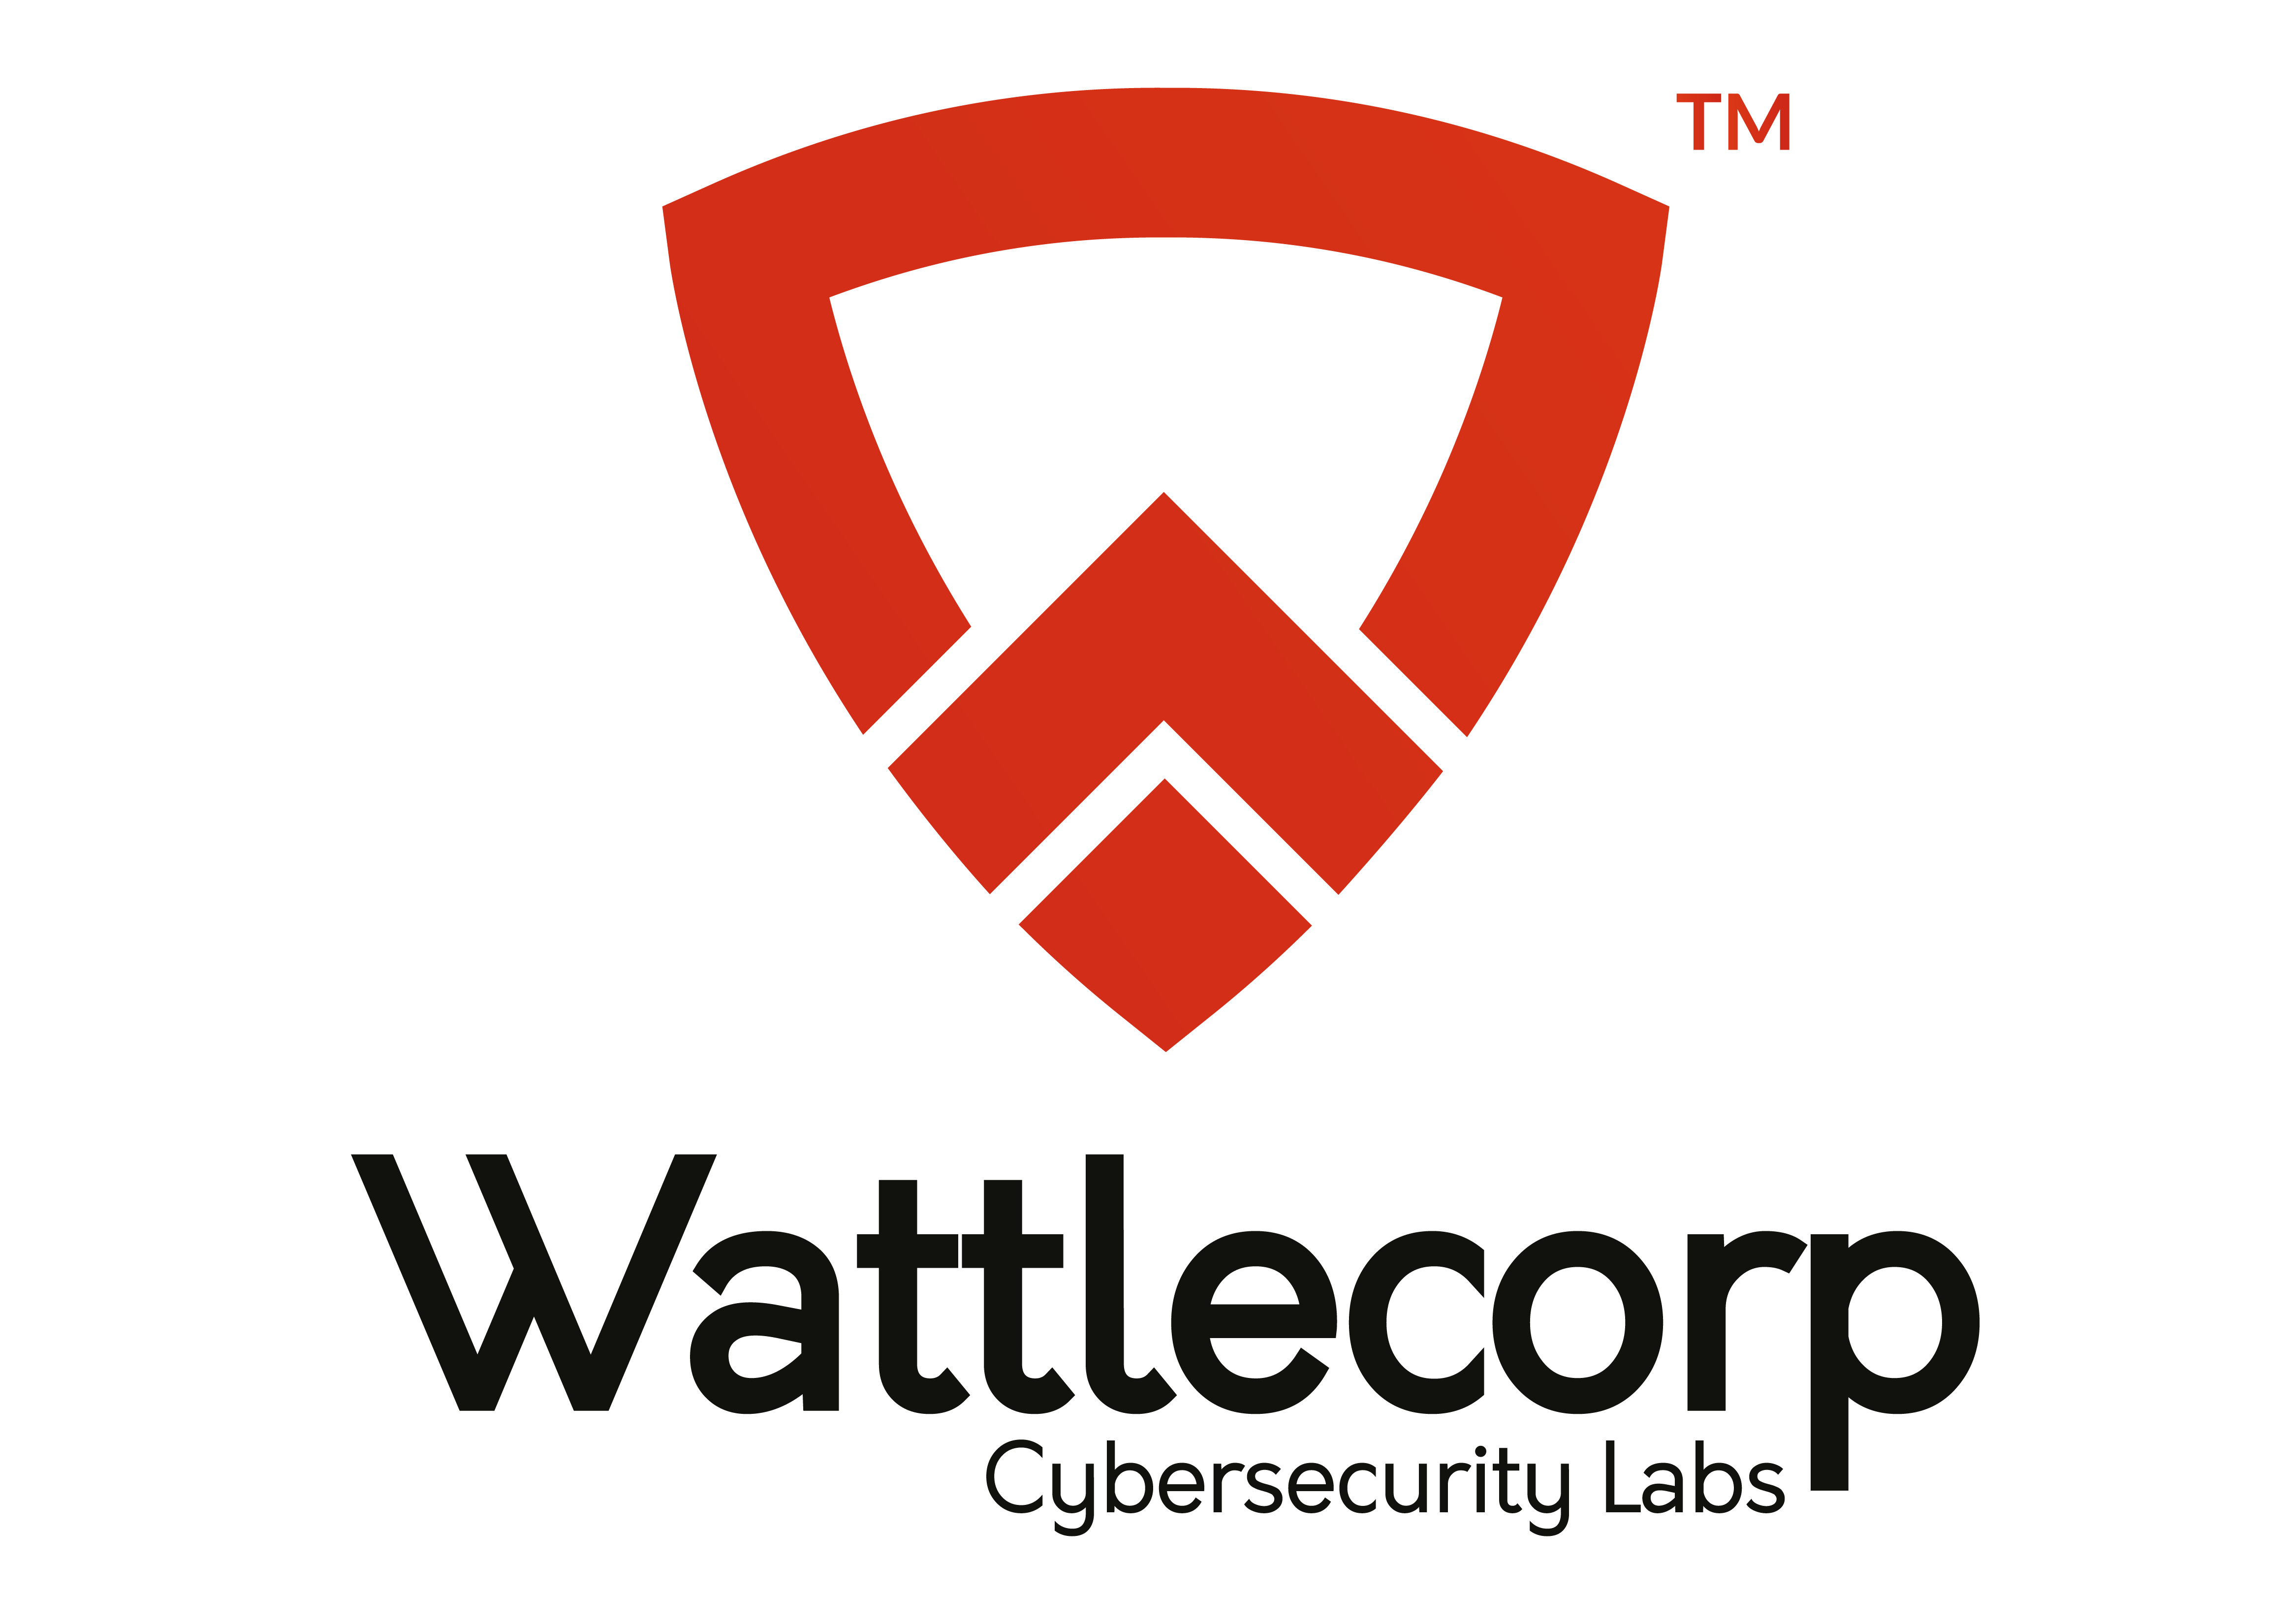 Wattlecorp Cybersecurity Labs profile on Qualified.One